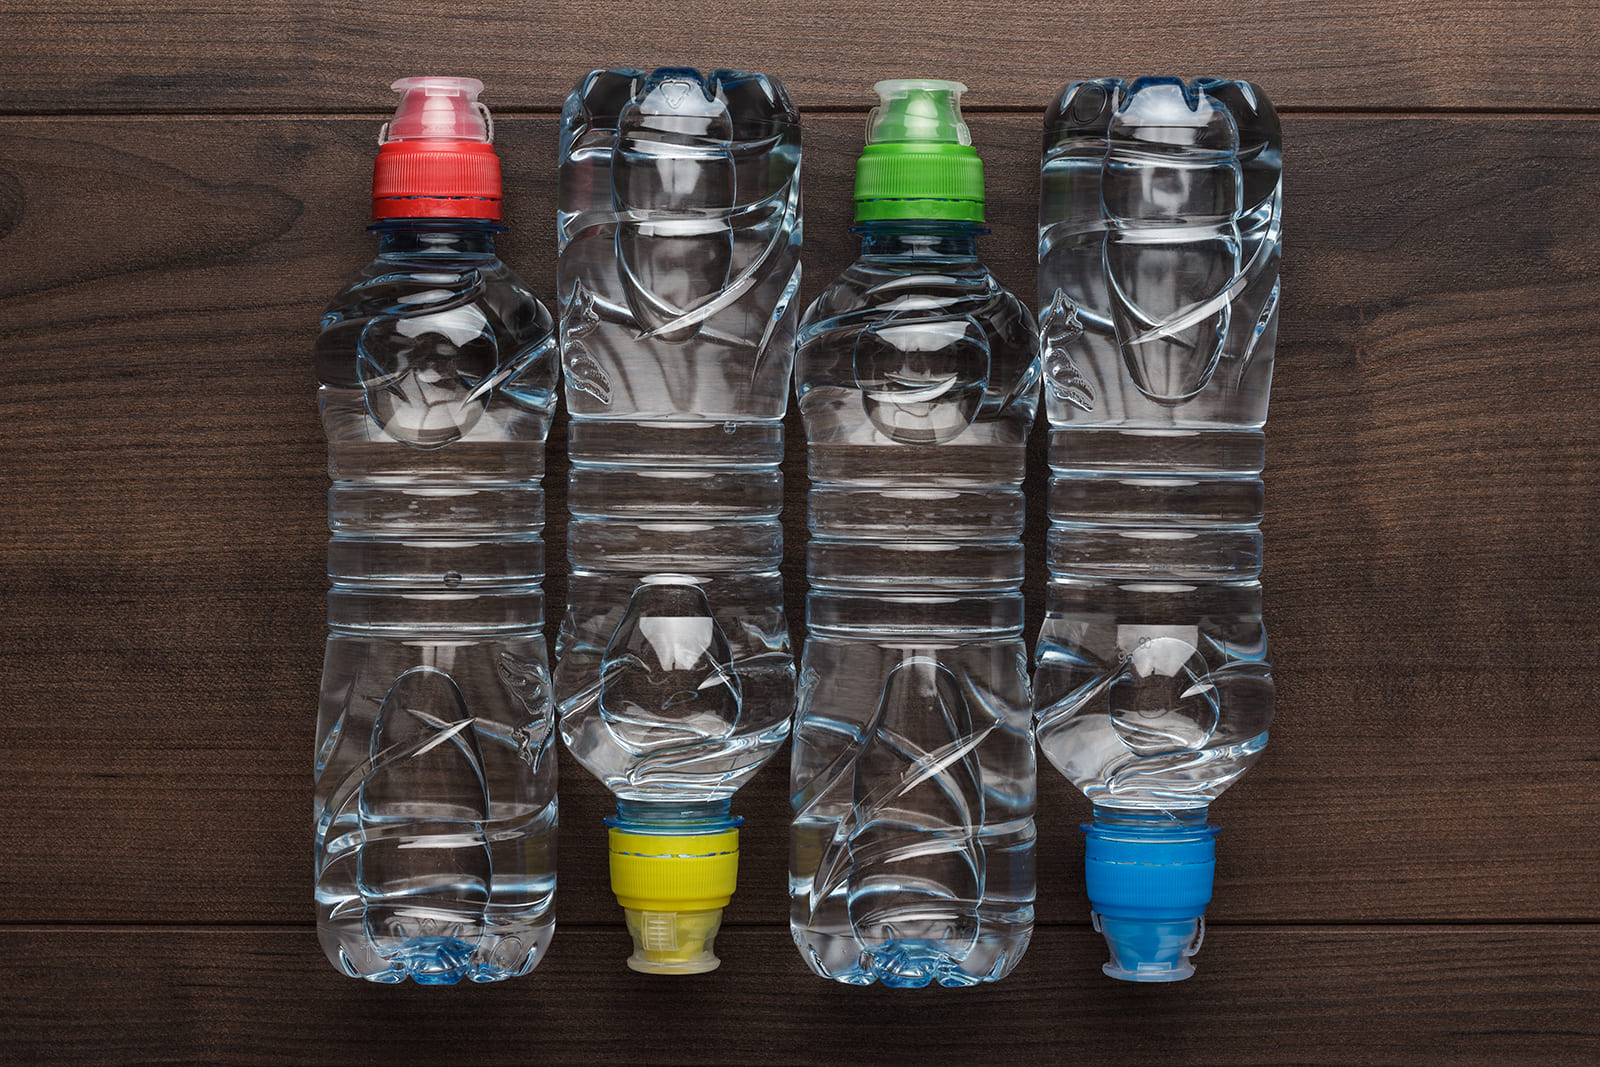 A liter of bottled water contains an average of 240,000 pieces of plastic. GETTY